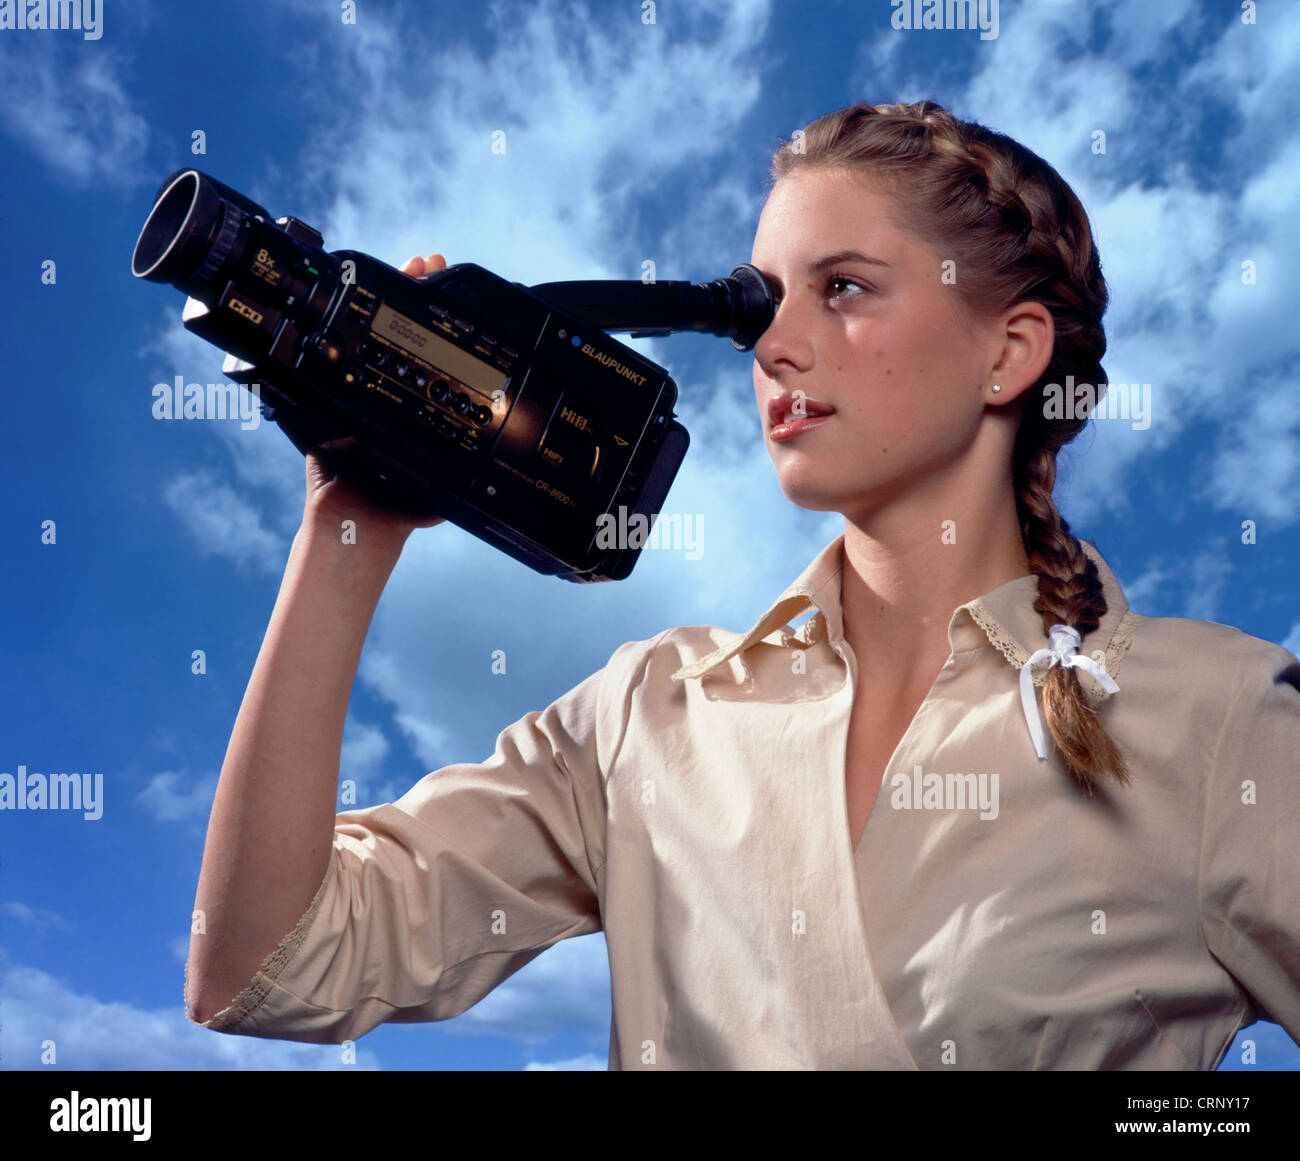 Woman filming with Super 8 camera Stock Photo